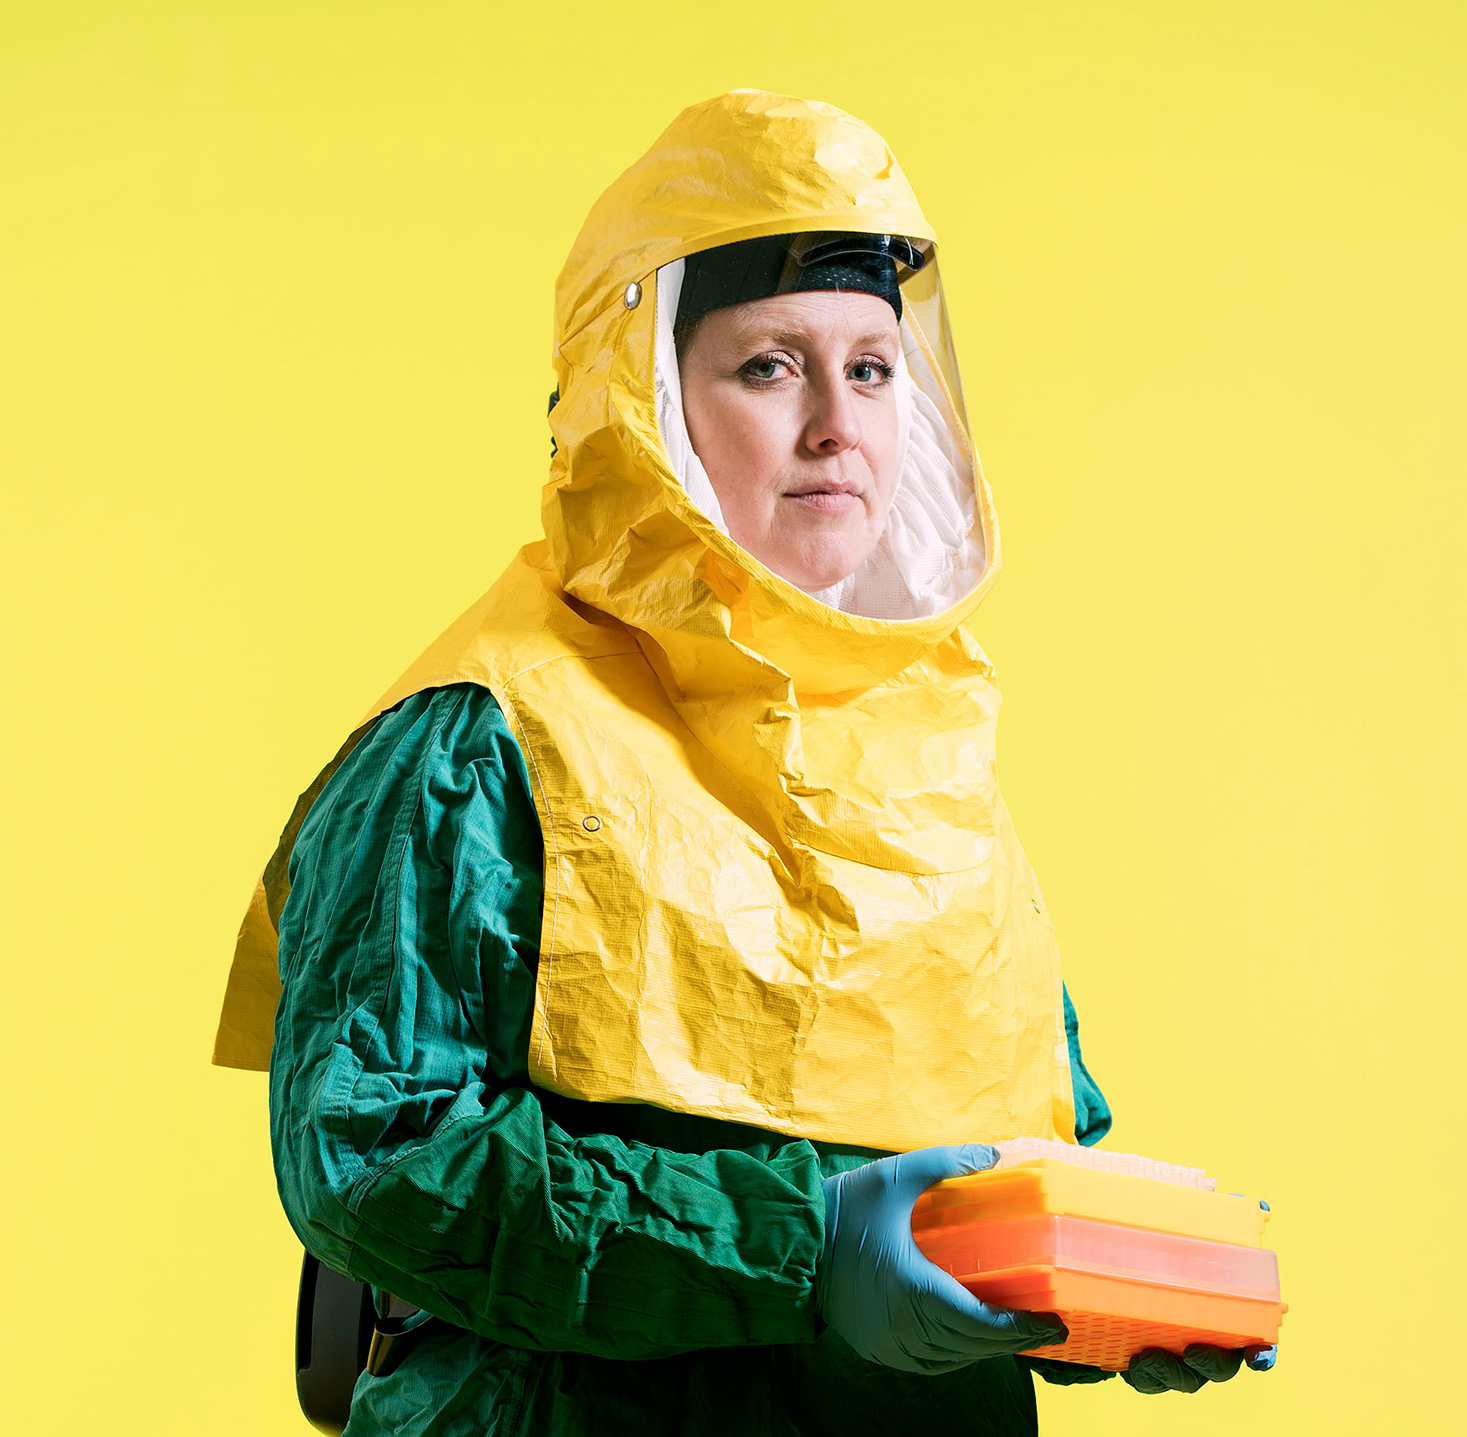 Researcher wearing a yellow and green hazmat suit, holding rectangular containers